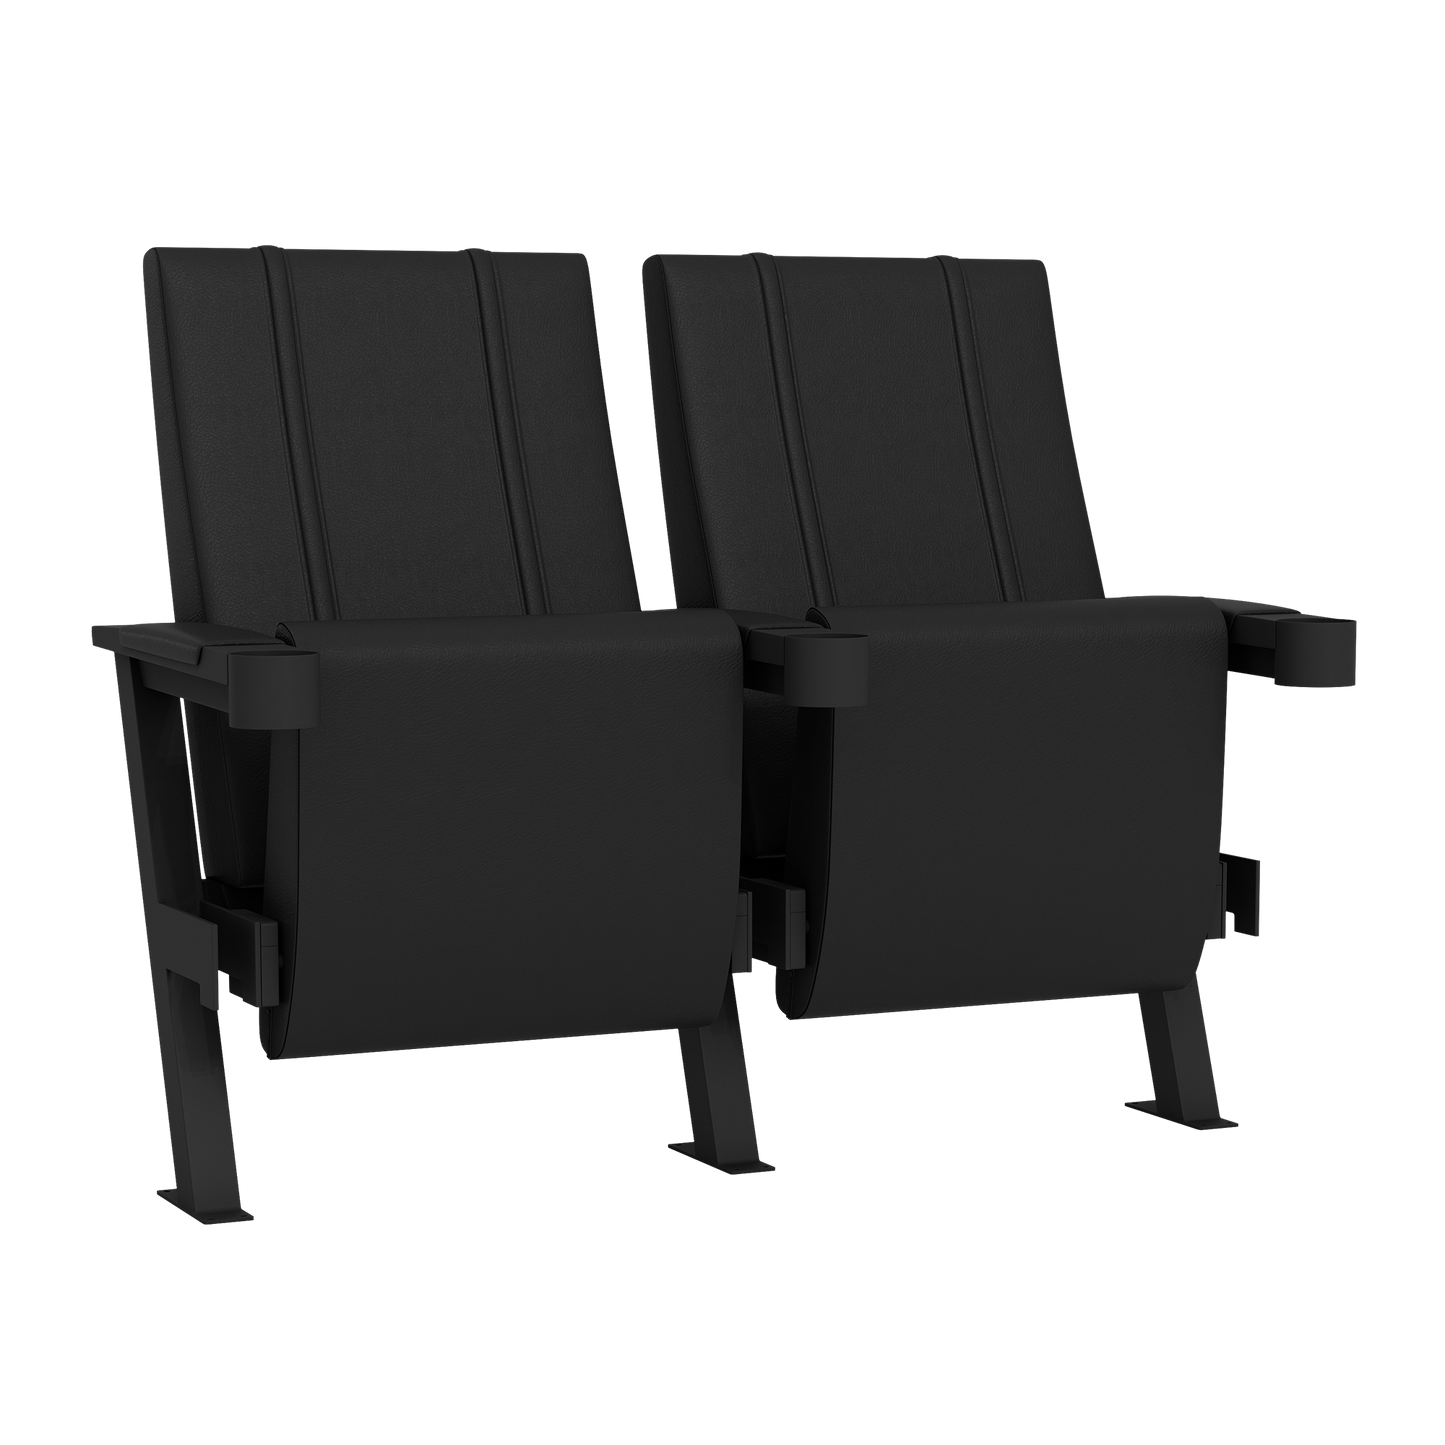 SuiteMax 3.5 VIP Seats with Golden State Warriors 2017 Champions Logo